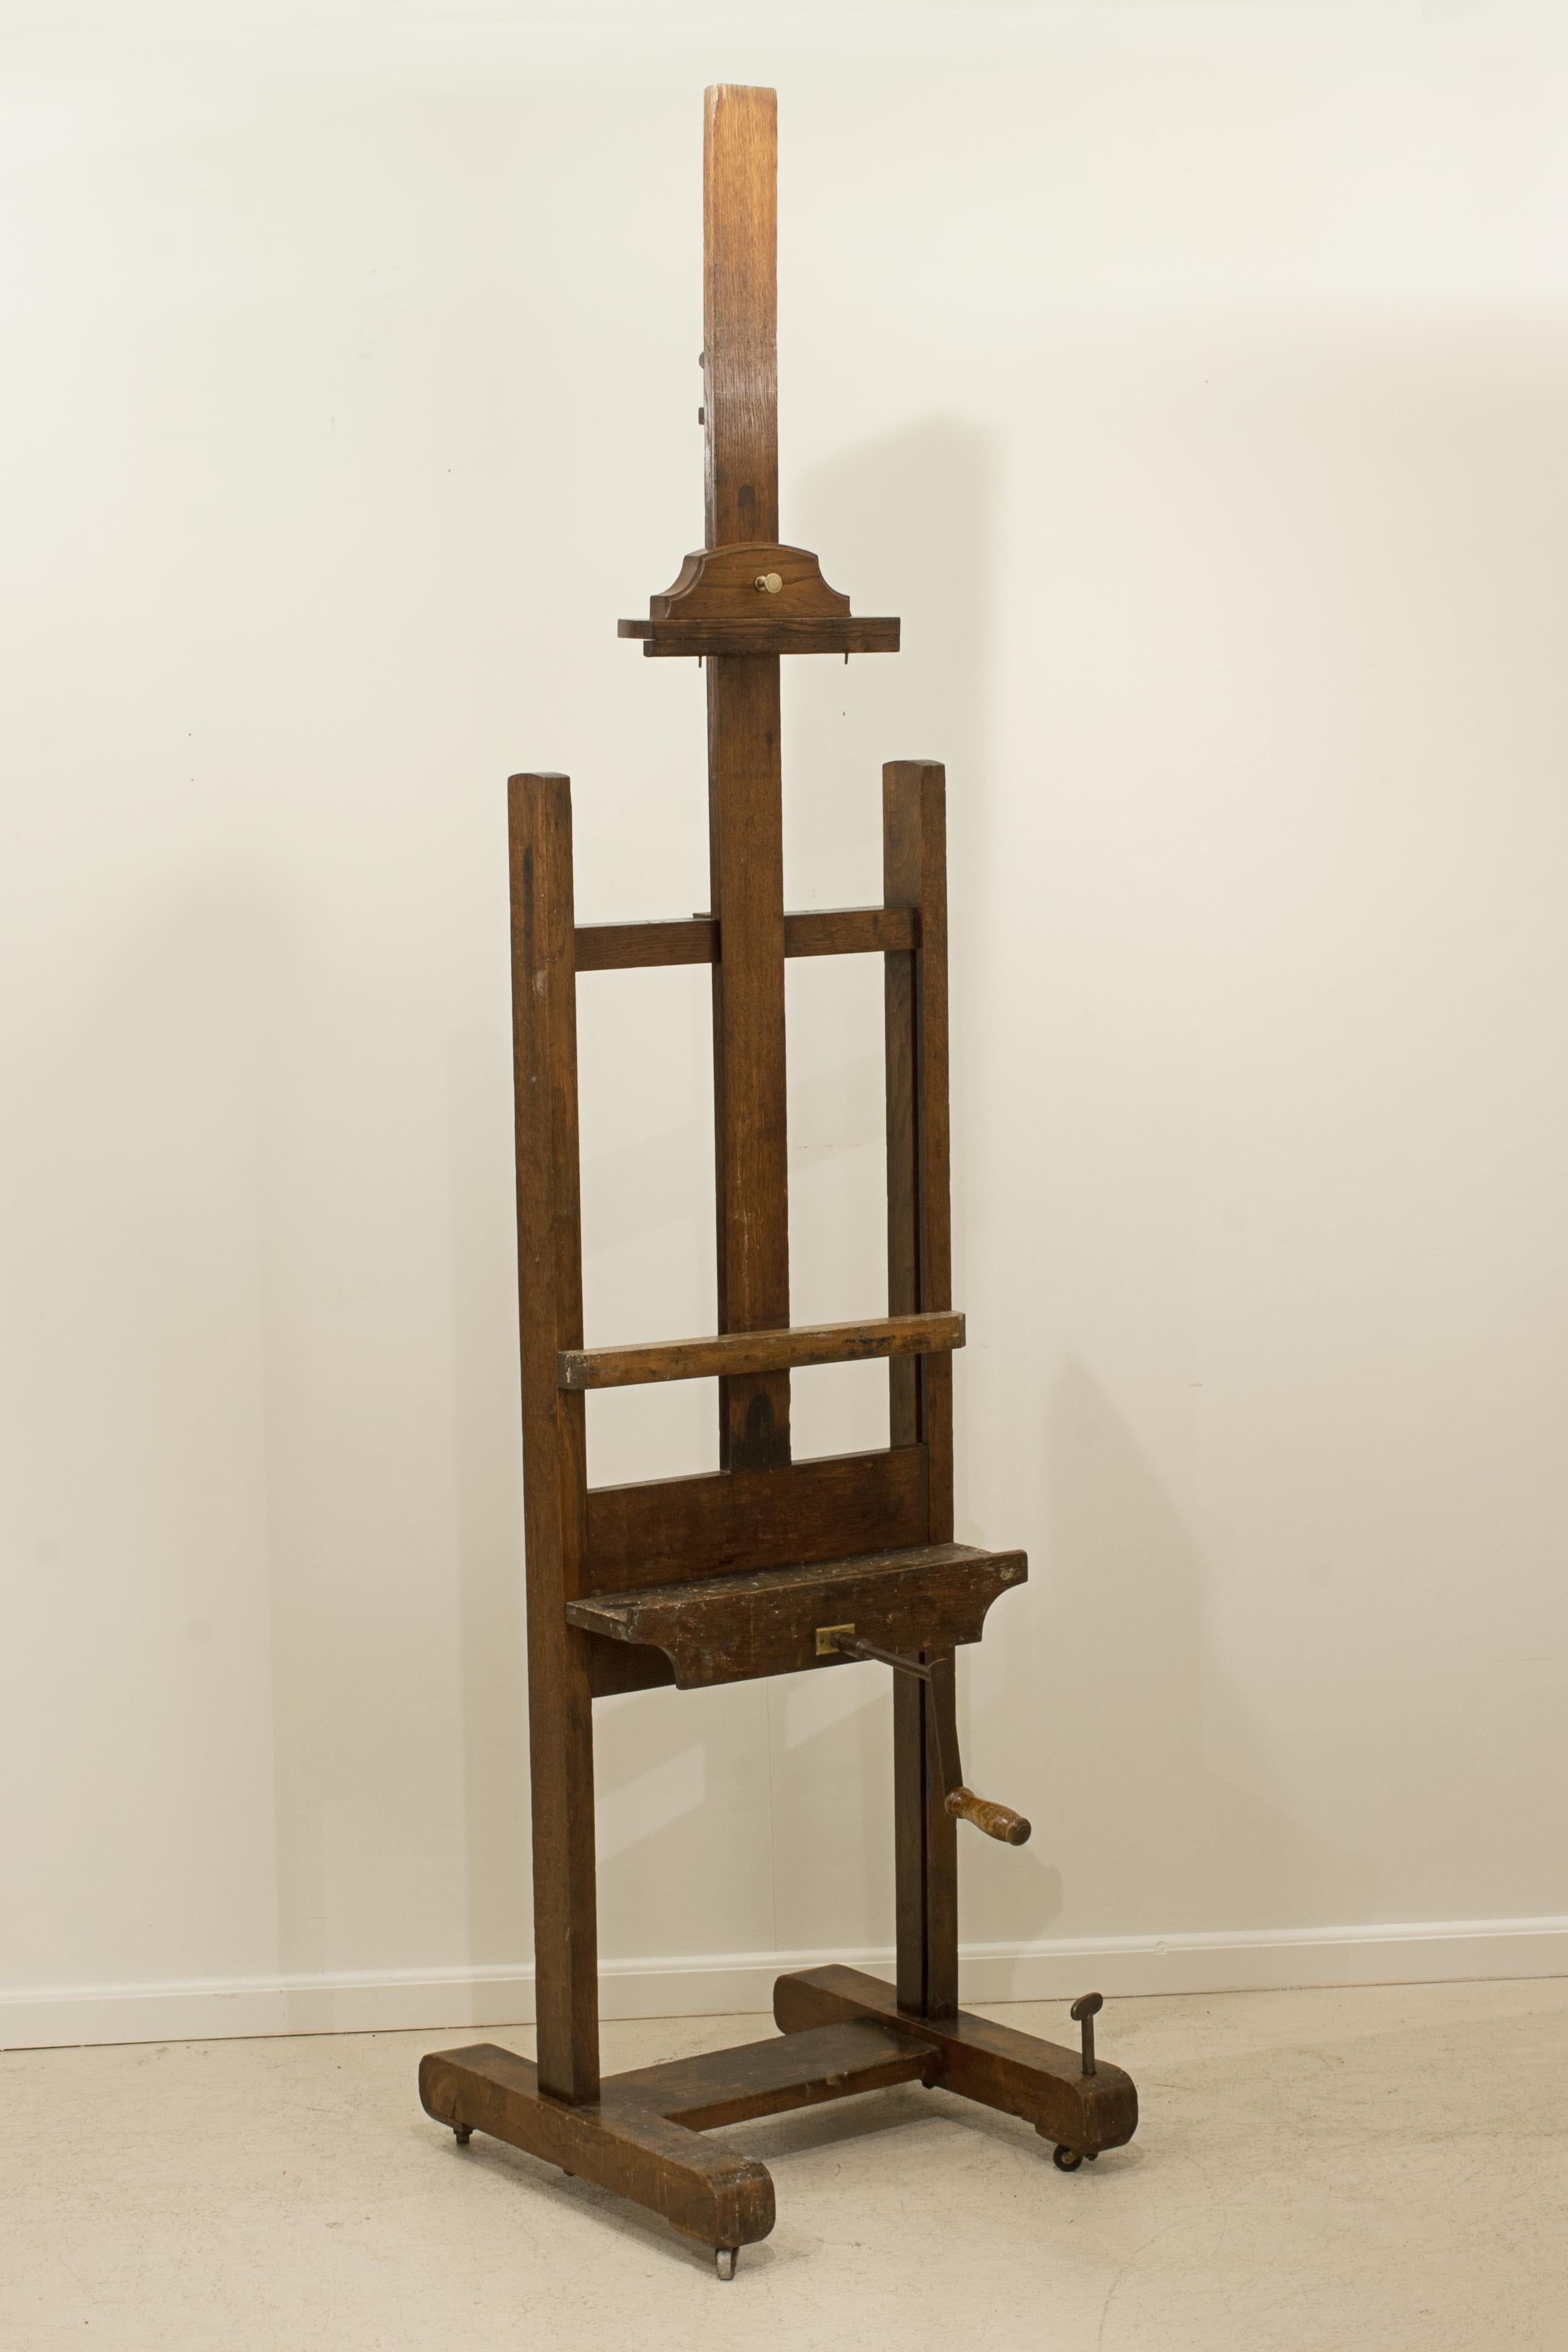 Vintage Young's Oak Artist's Easel.
An adjustable artist's studio easel raised up on a trestle base terminating in four casters, one castor is adjustable for levelling off. The painter's easel is made of solid oak with some oil paint remnants on the